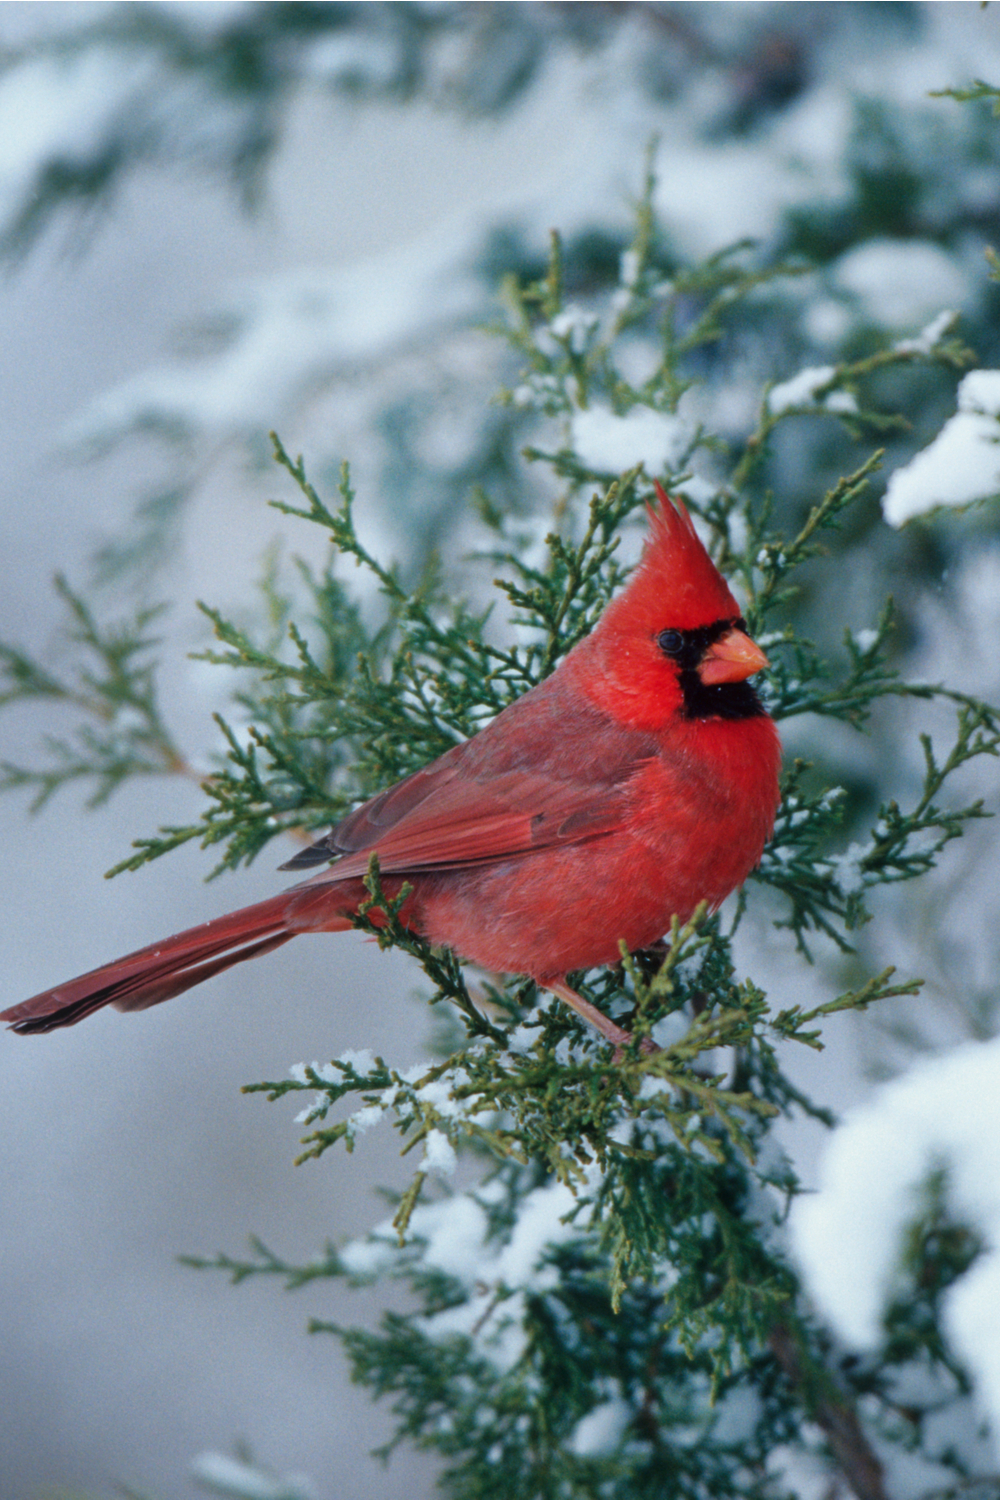 Native American stories about cardinals